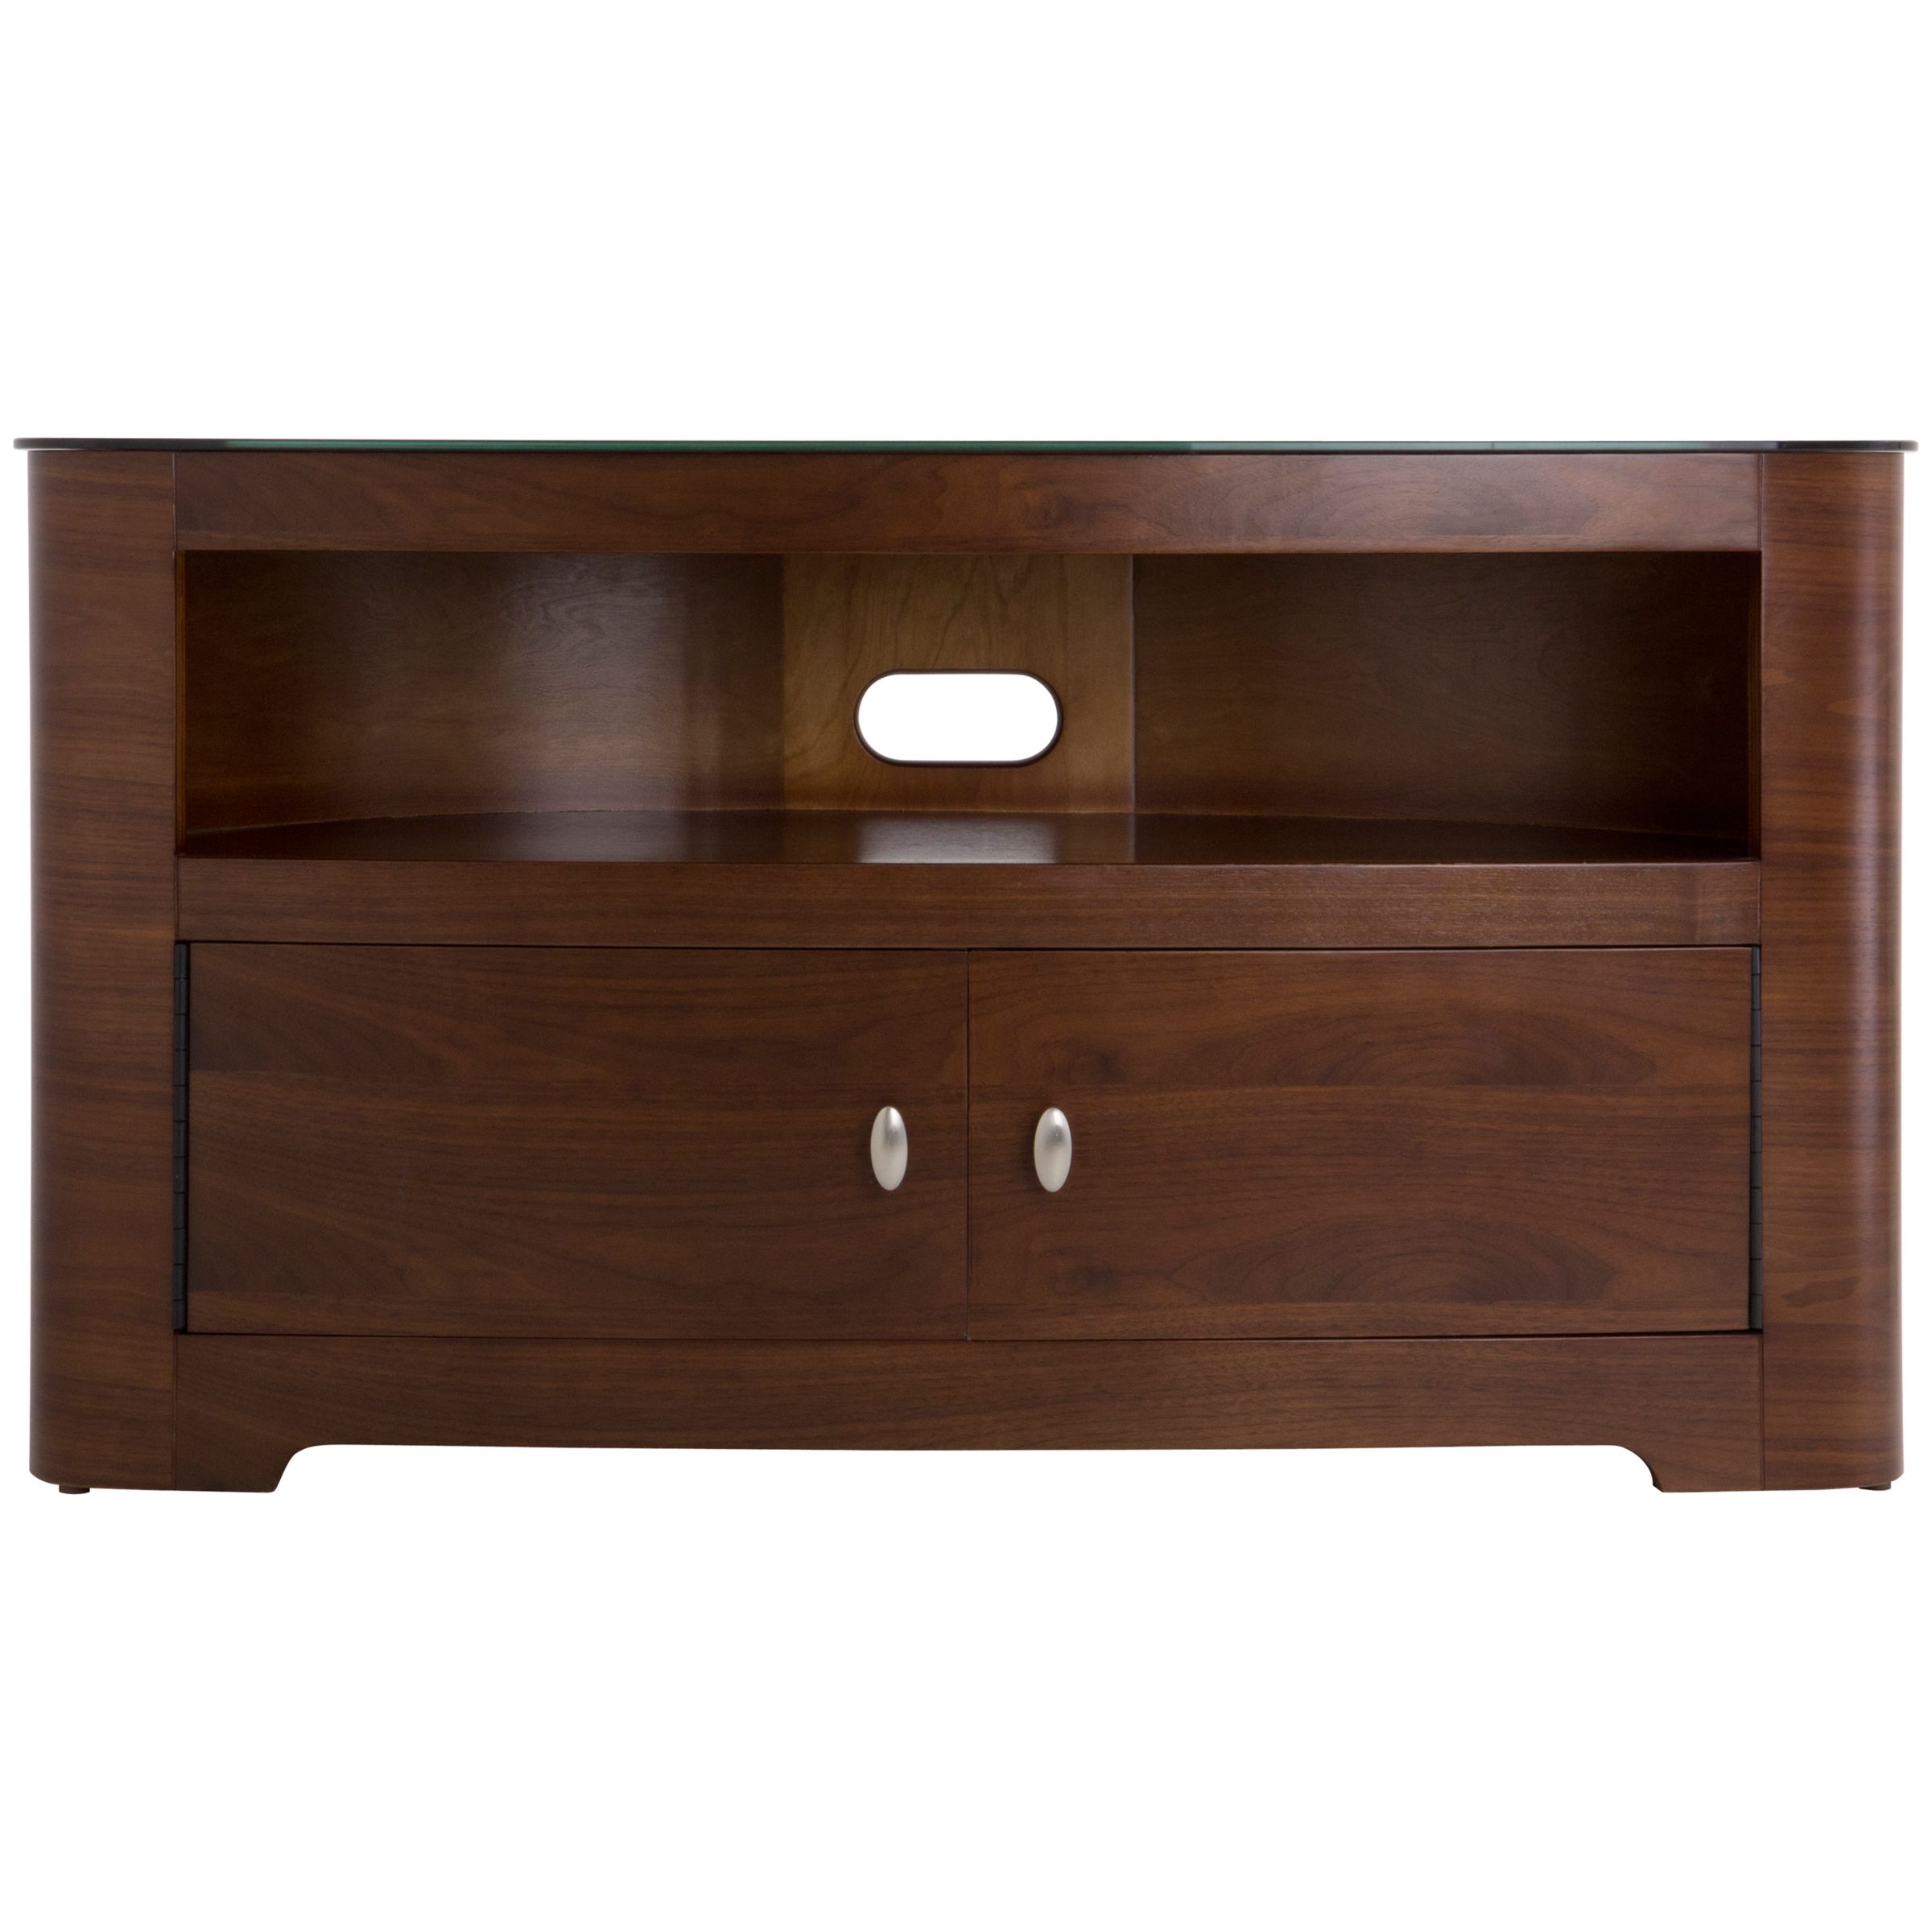 AVF Blenheim 1100 TV Stand for TVs up to 55-inches, Walnut, width 110cm